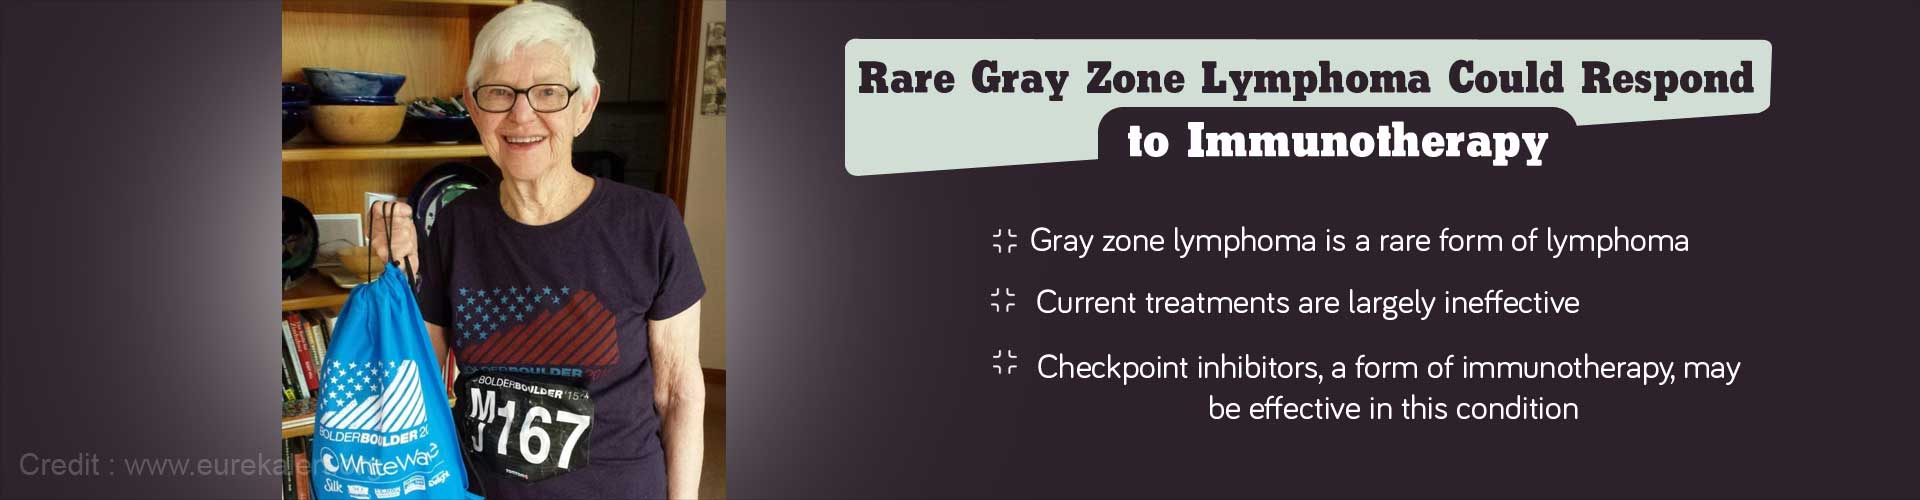 Rare gray zone lymphoma could respond to immunotherapy
- Gray zone lymphoma is a rare form of lymphoma
- Current treatments are largely ineffective
- Checkpoint inhibitors, a form of immunotherapy, may be effective in this condition